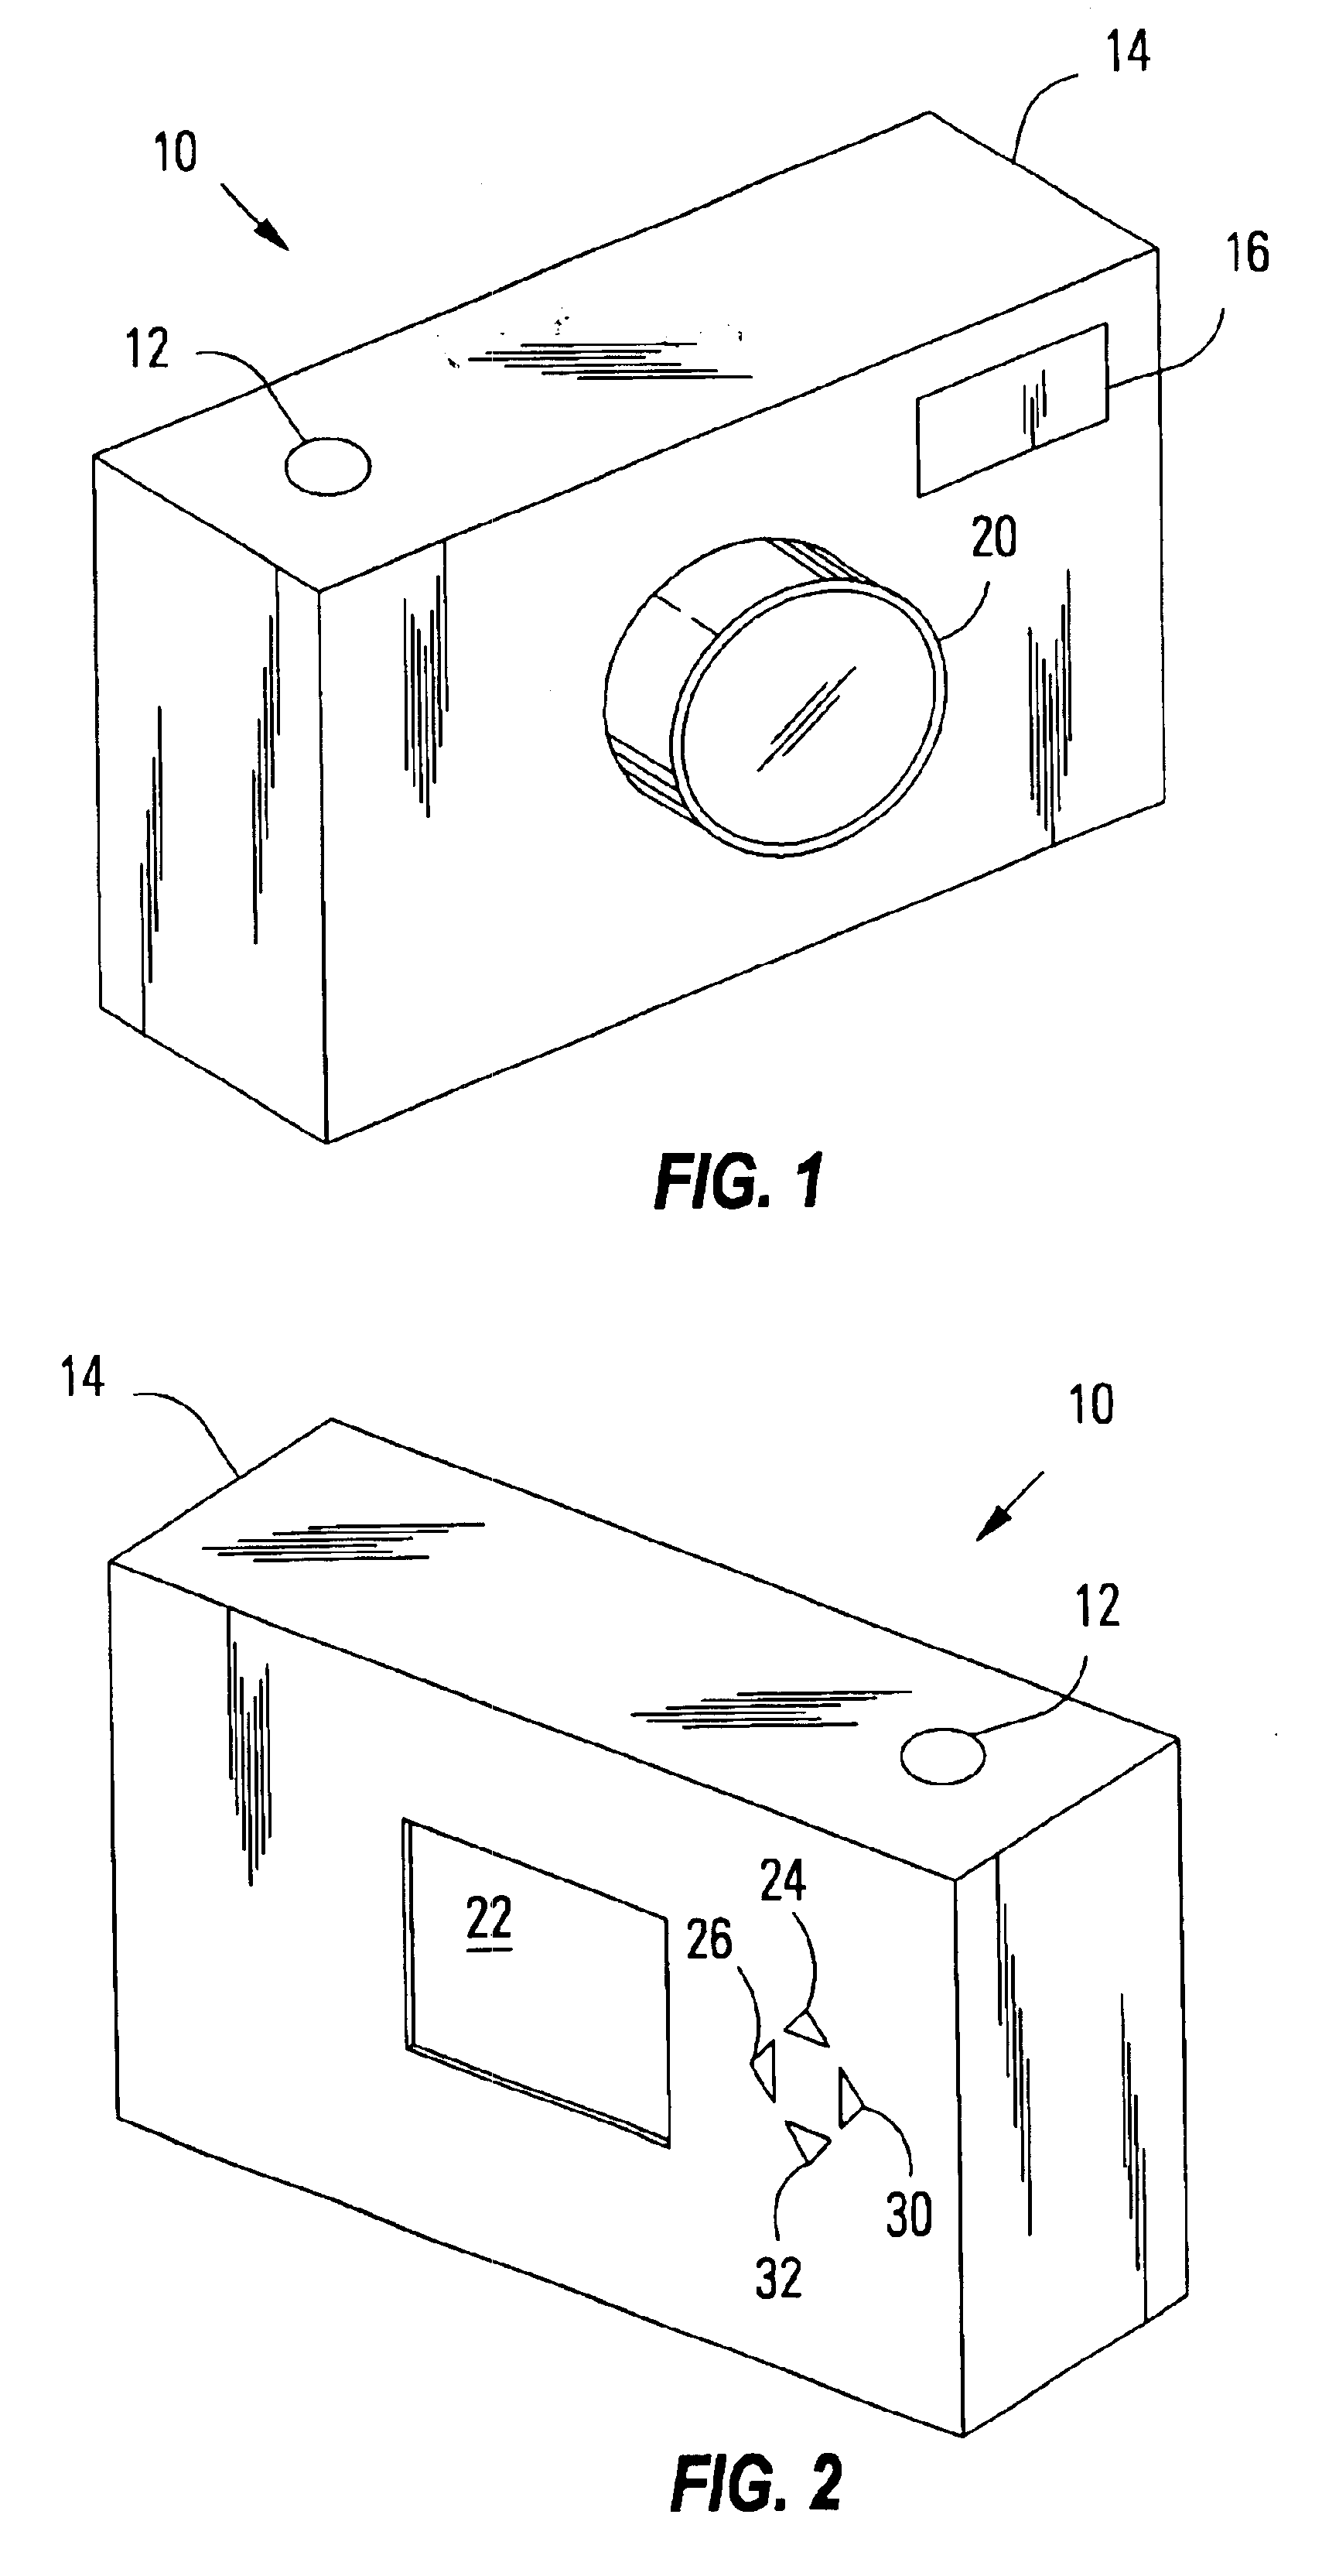 Adaptive and learning setting selection process for imaging device